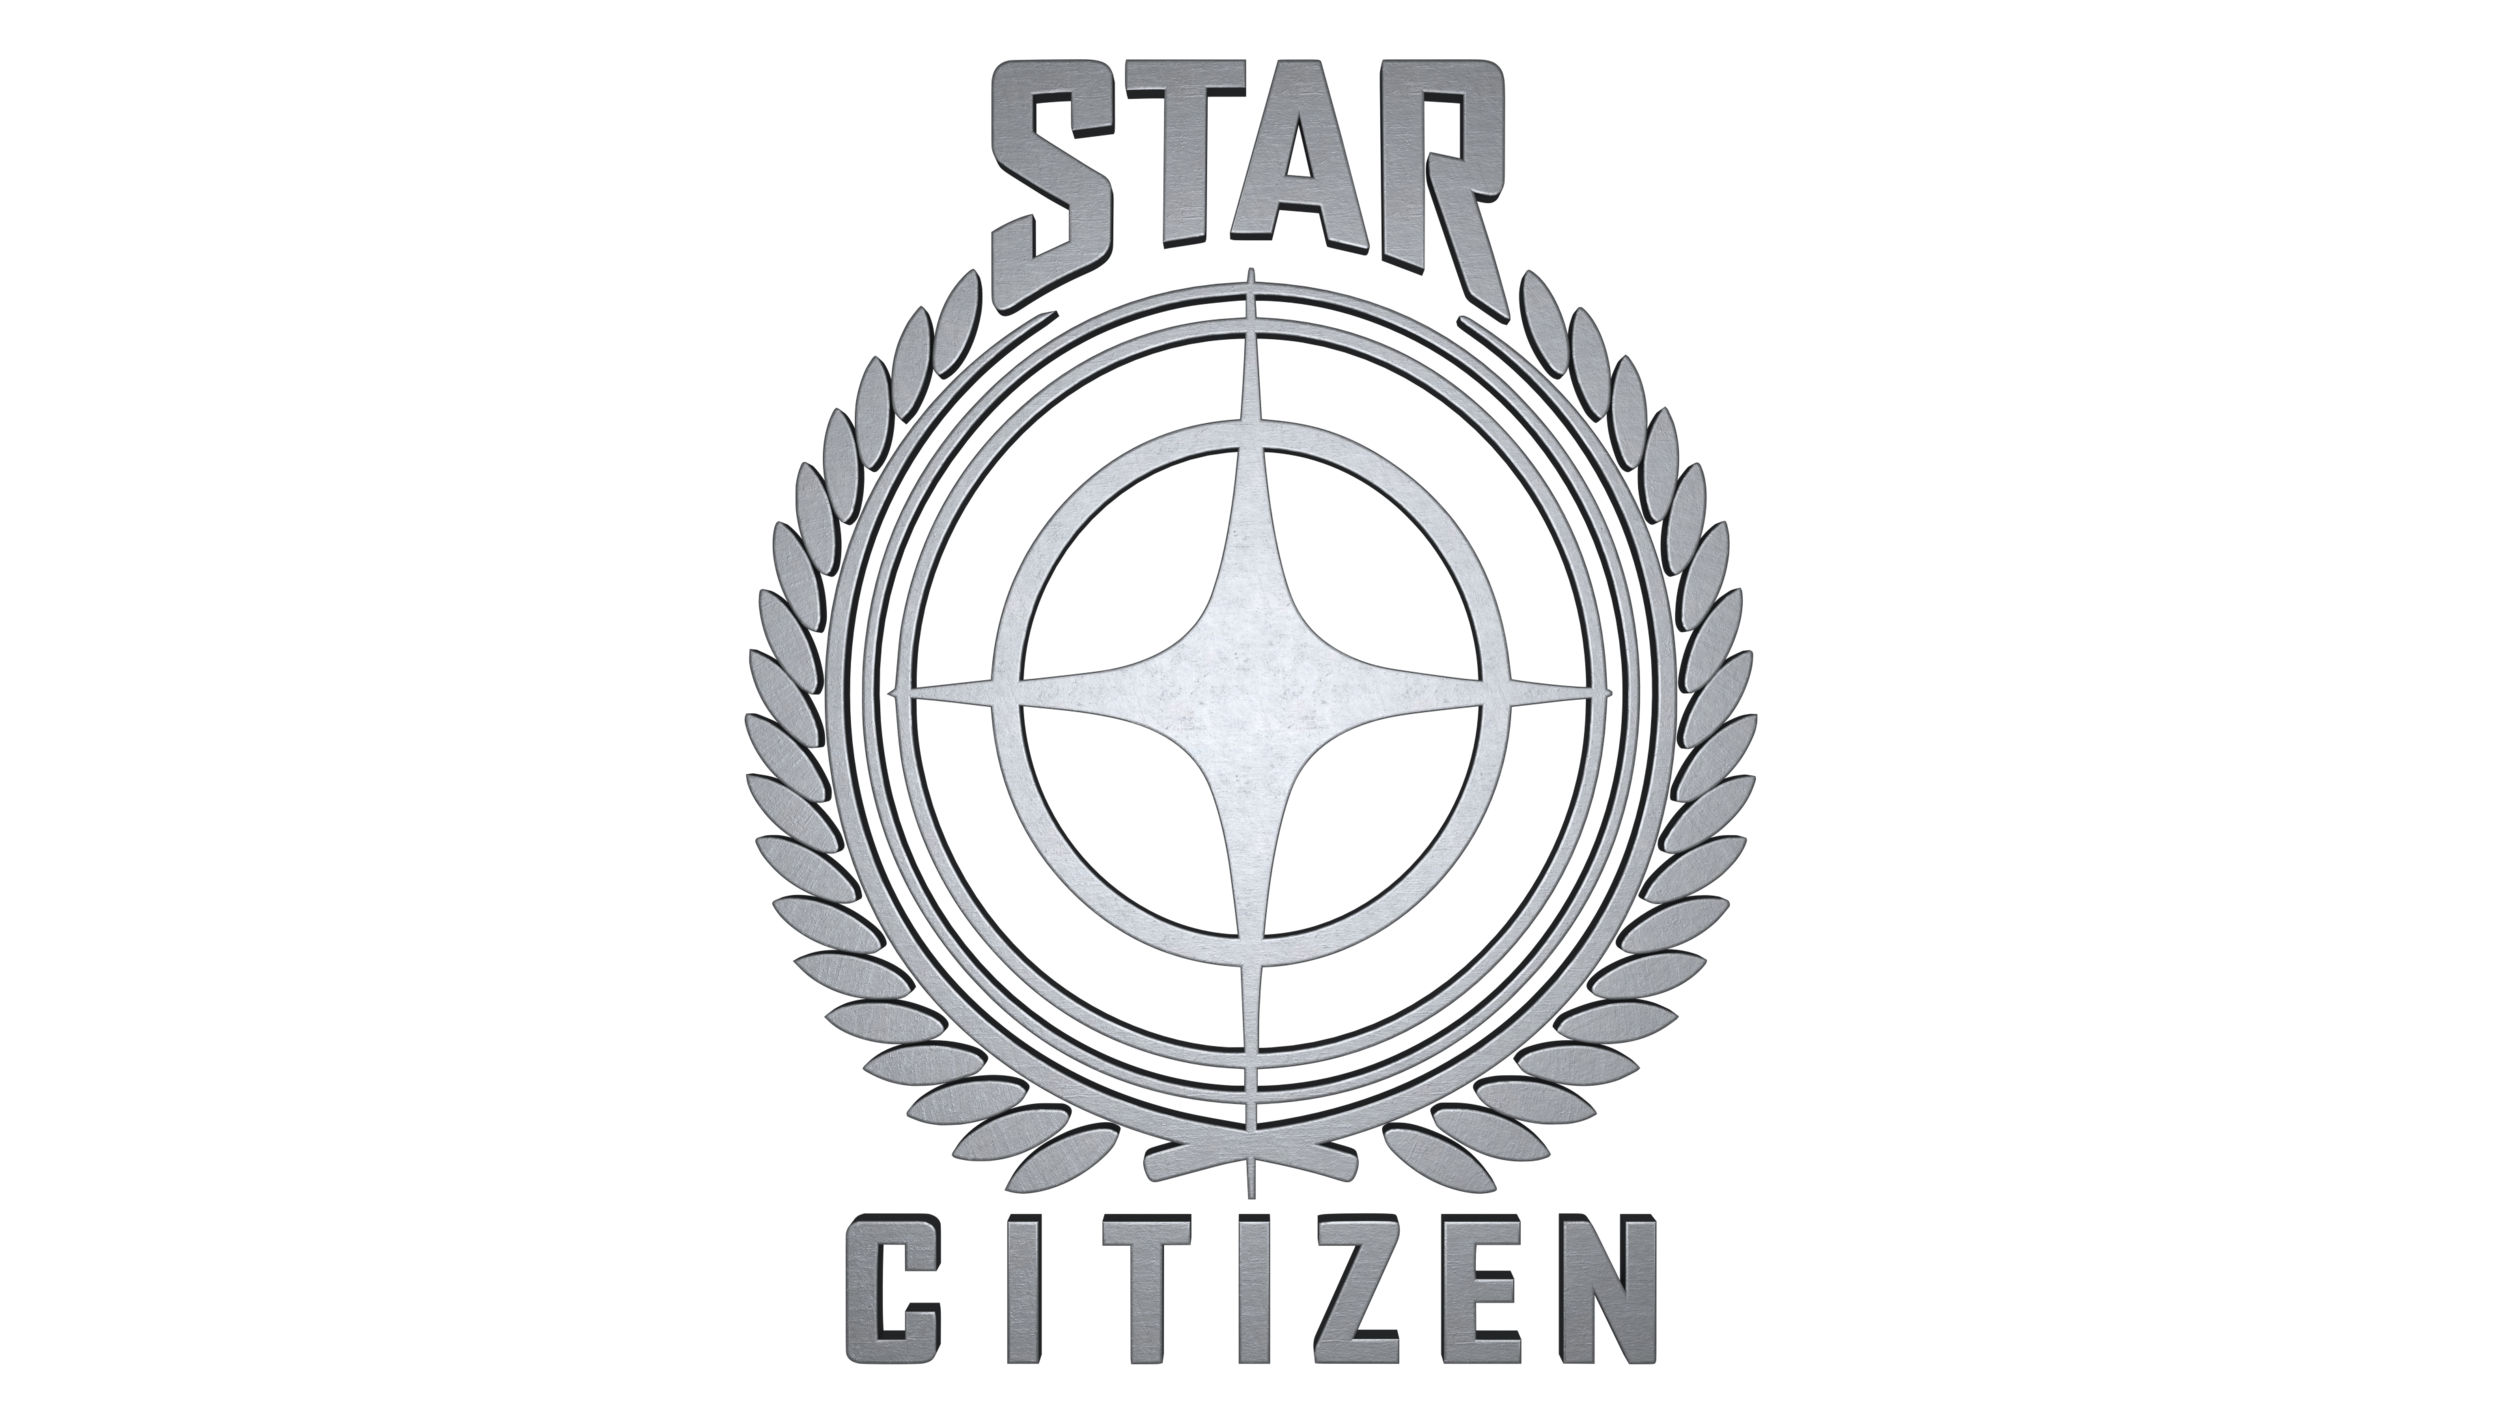 The Hull A - Roberts Space Industries  Follow the development of Star  Citizen and Squadron 42